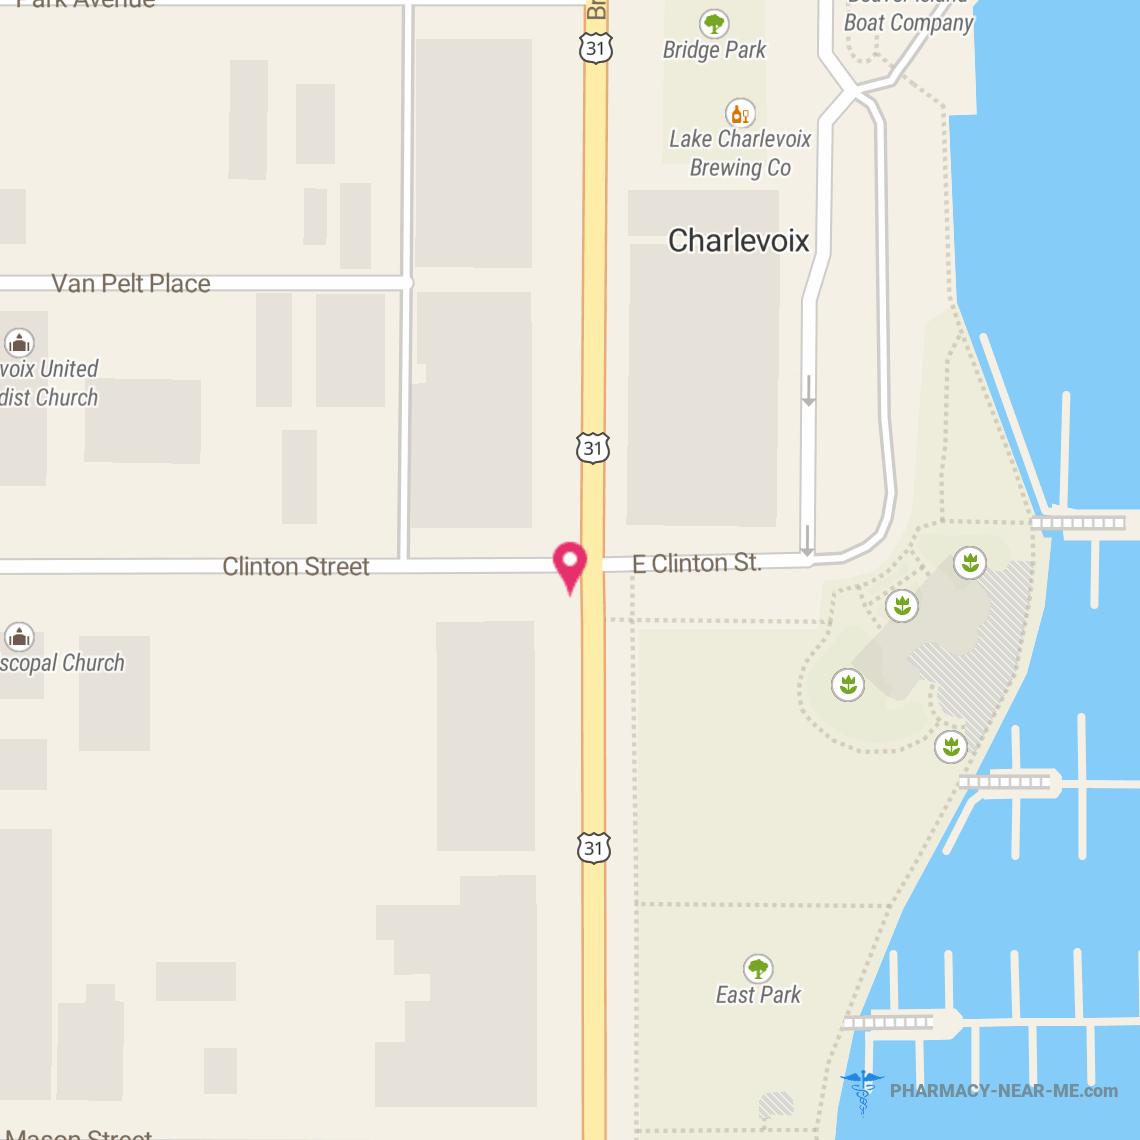 CENTRAL DRUG STORE - Pharmacy Hours, Phone, Reviews & Information: 301 Bridge Street, Charlevoix, Michigan 49720, United States